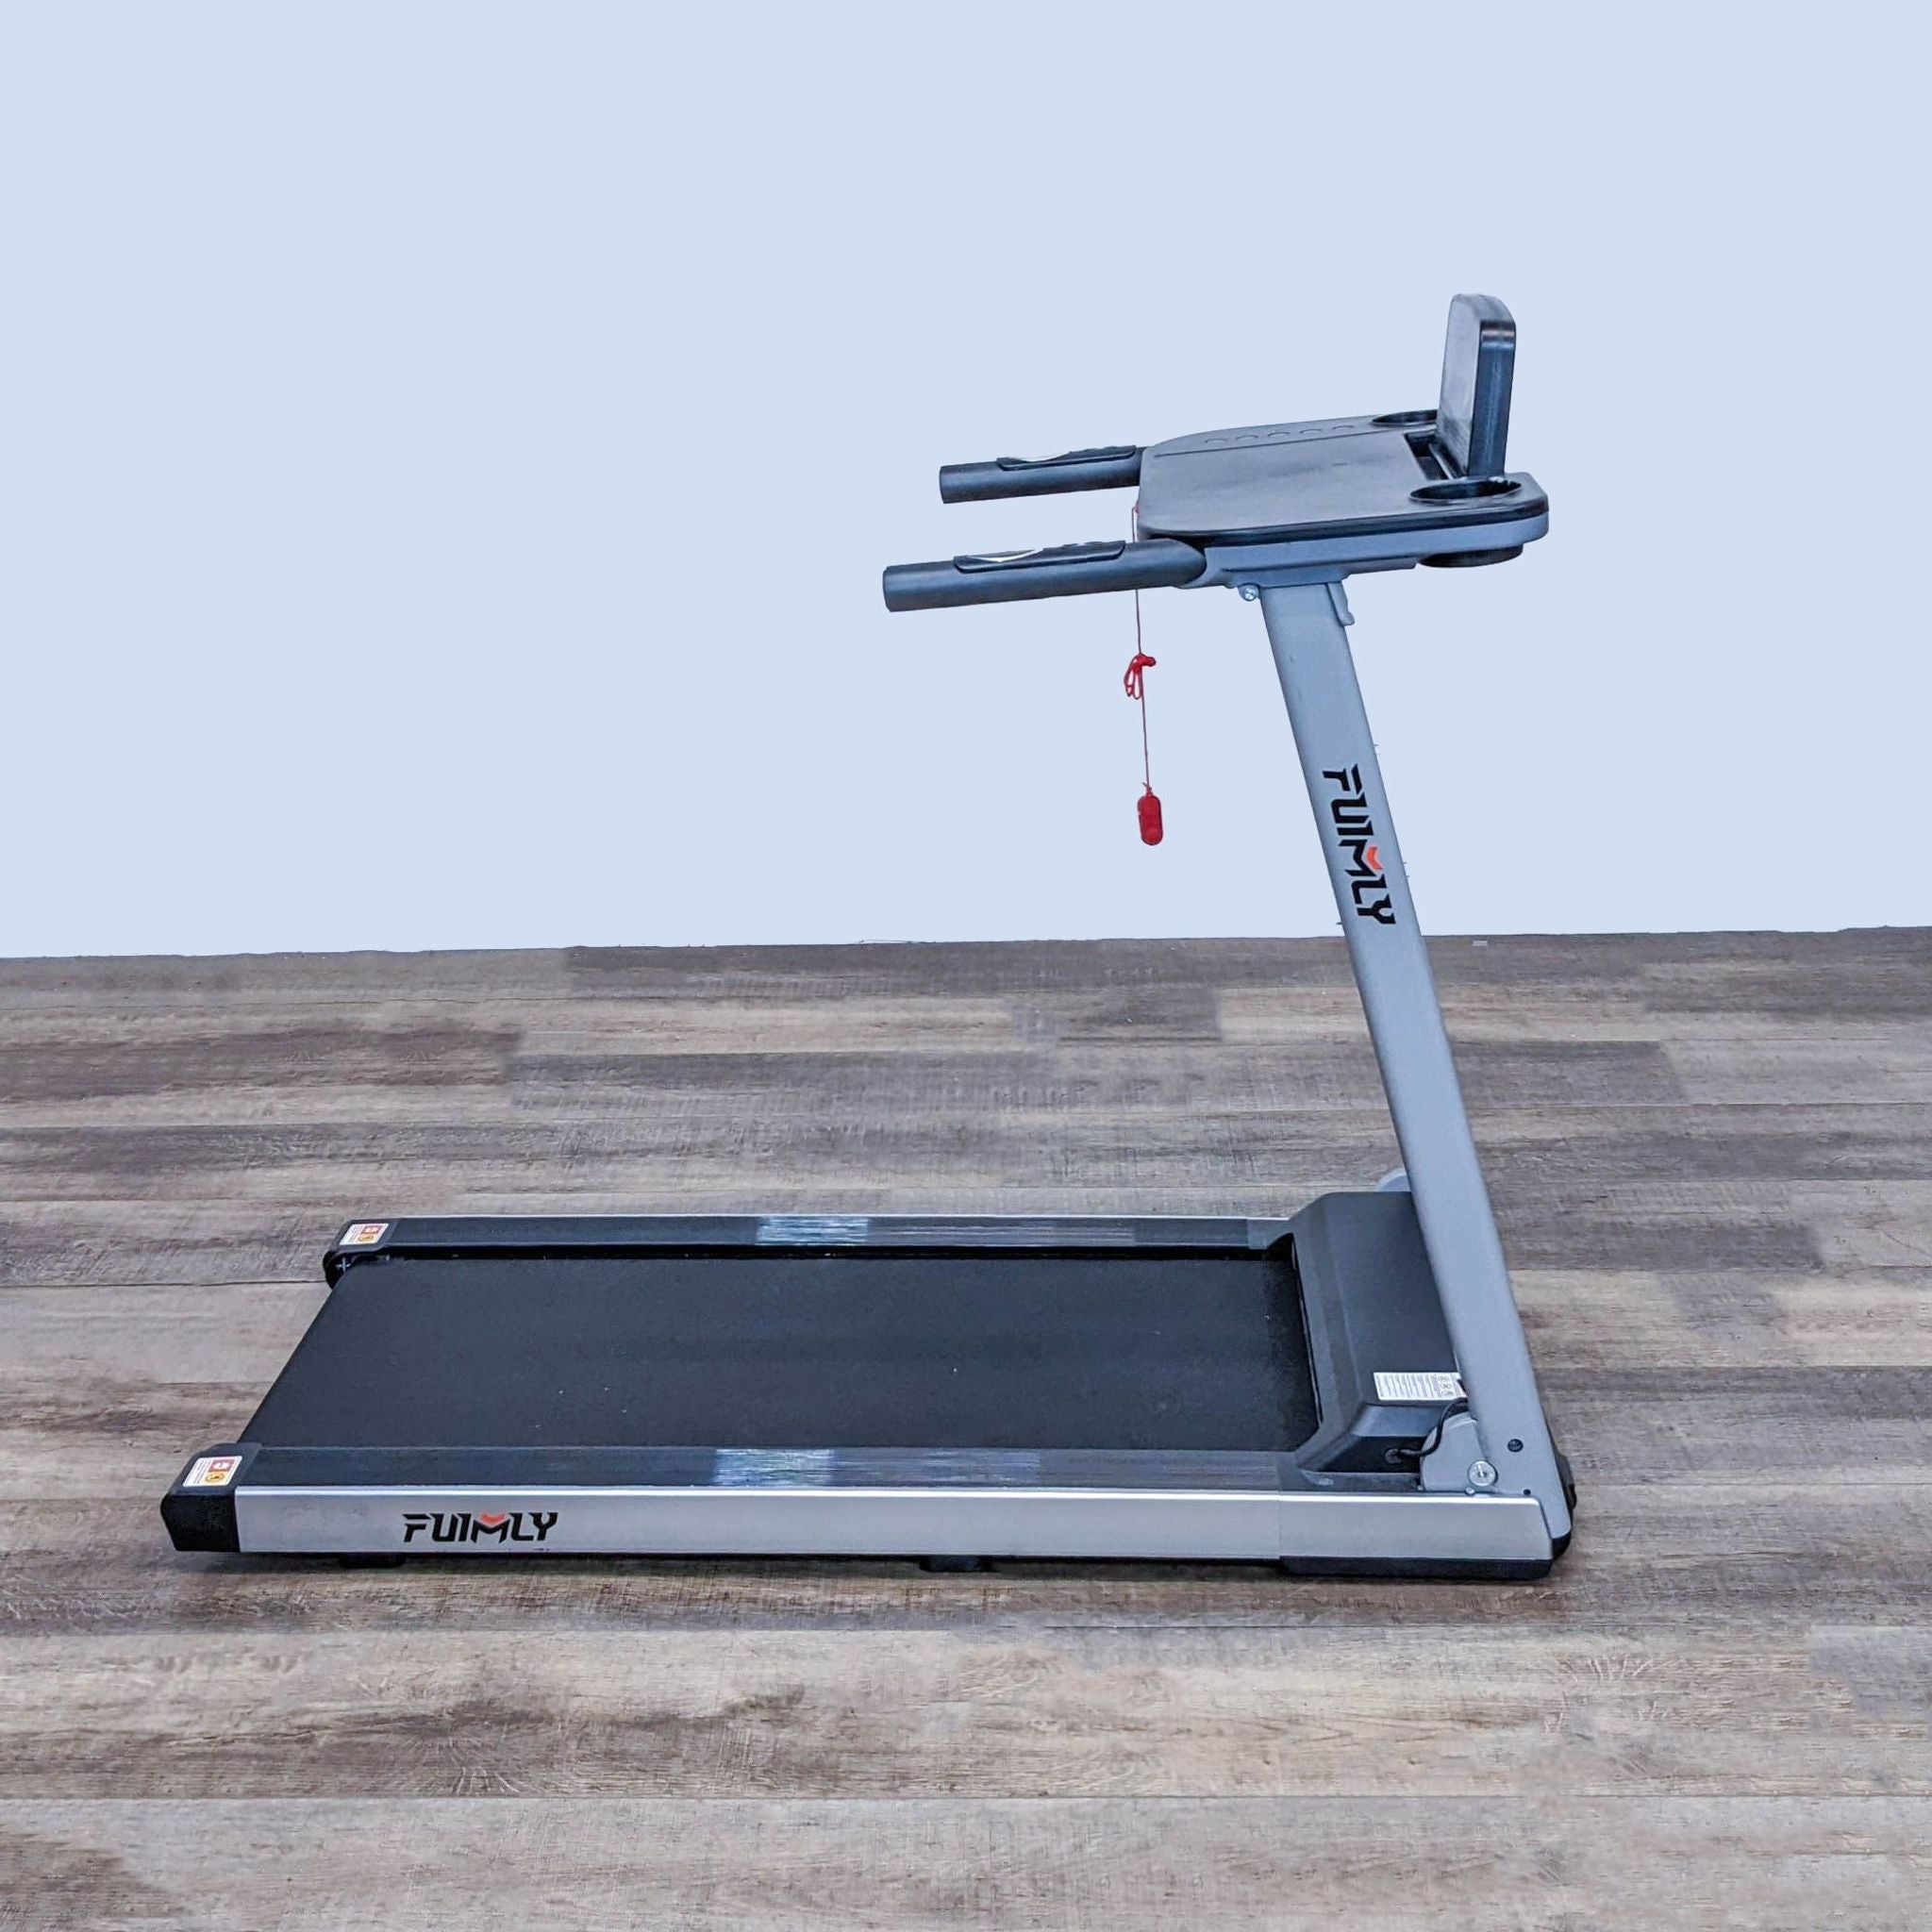 Side view of a Funmily branded treadmill showing profile, handrails, and console on a wooden floor background.